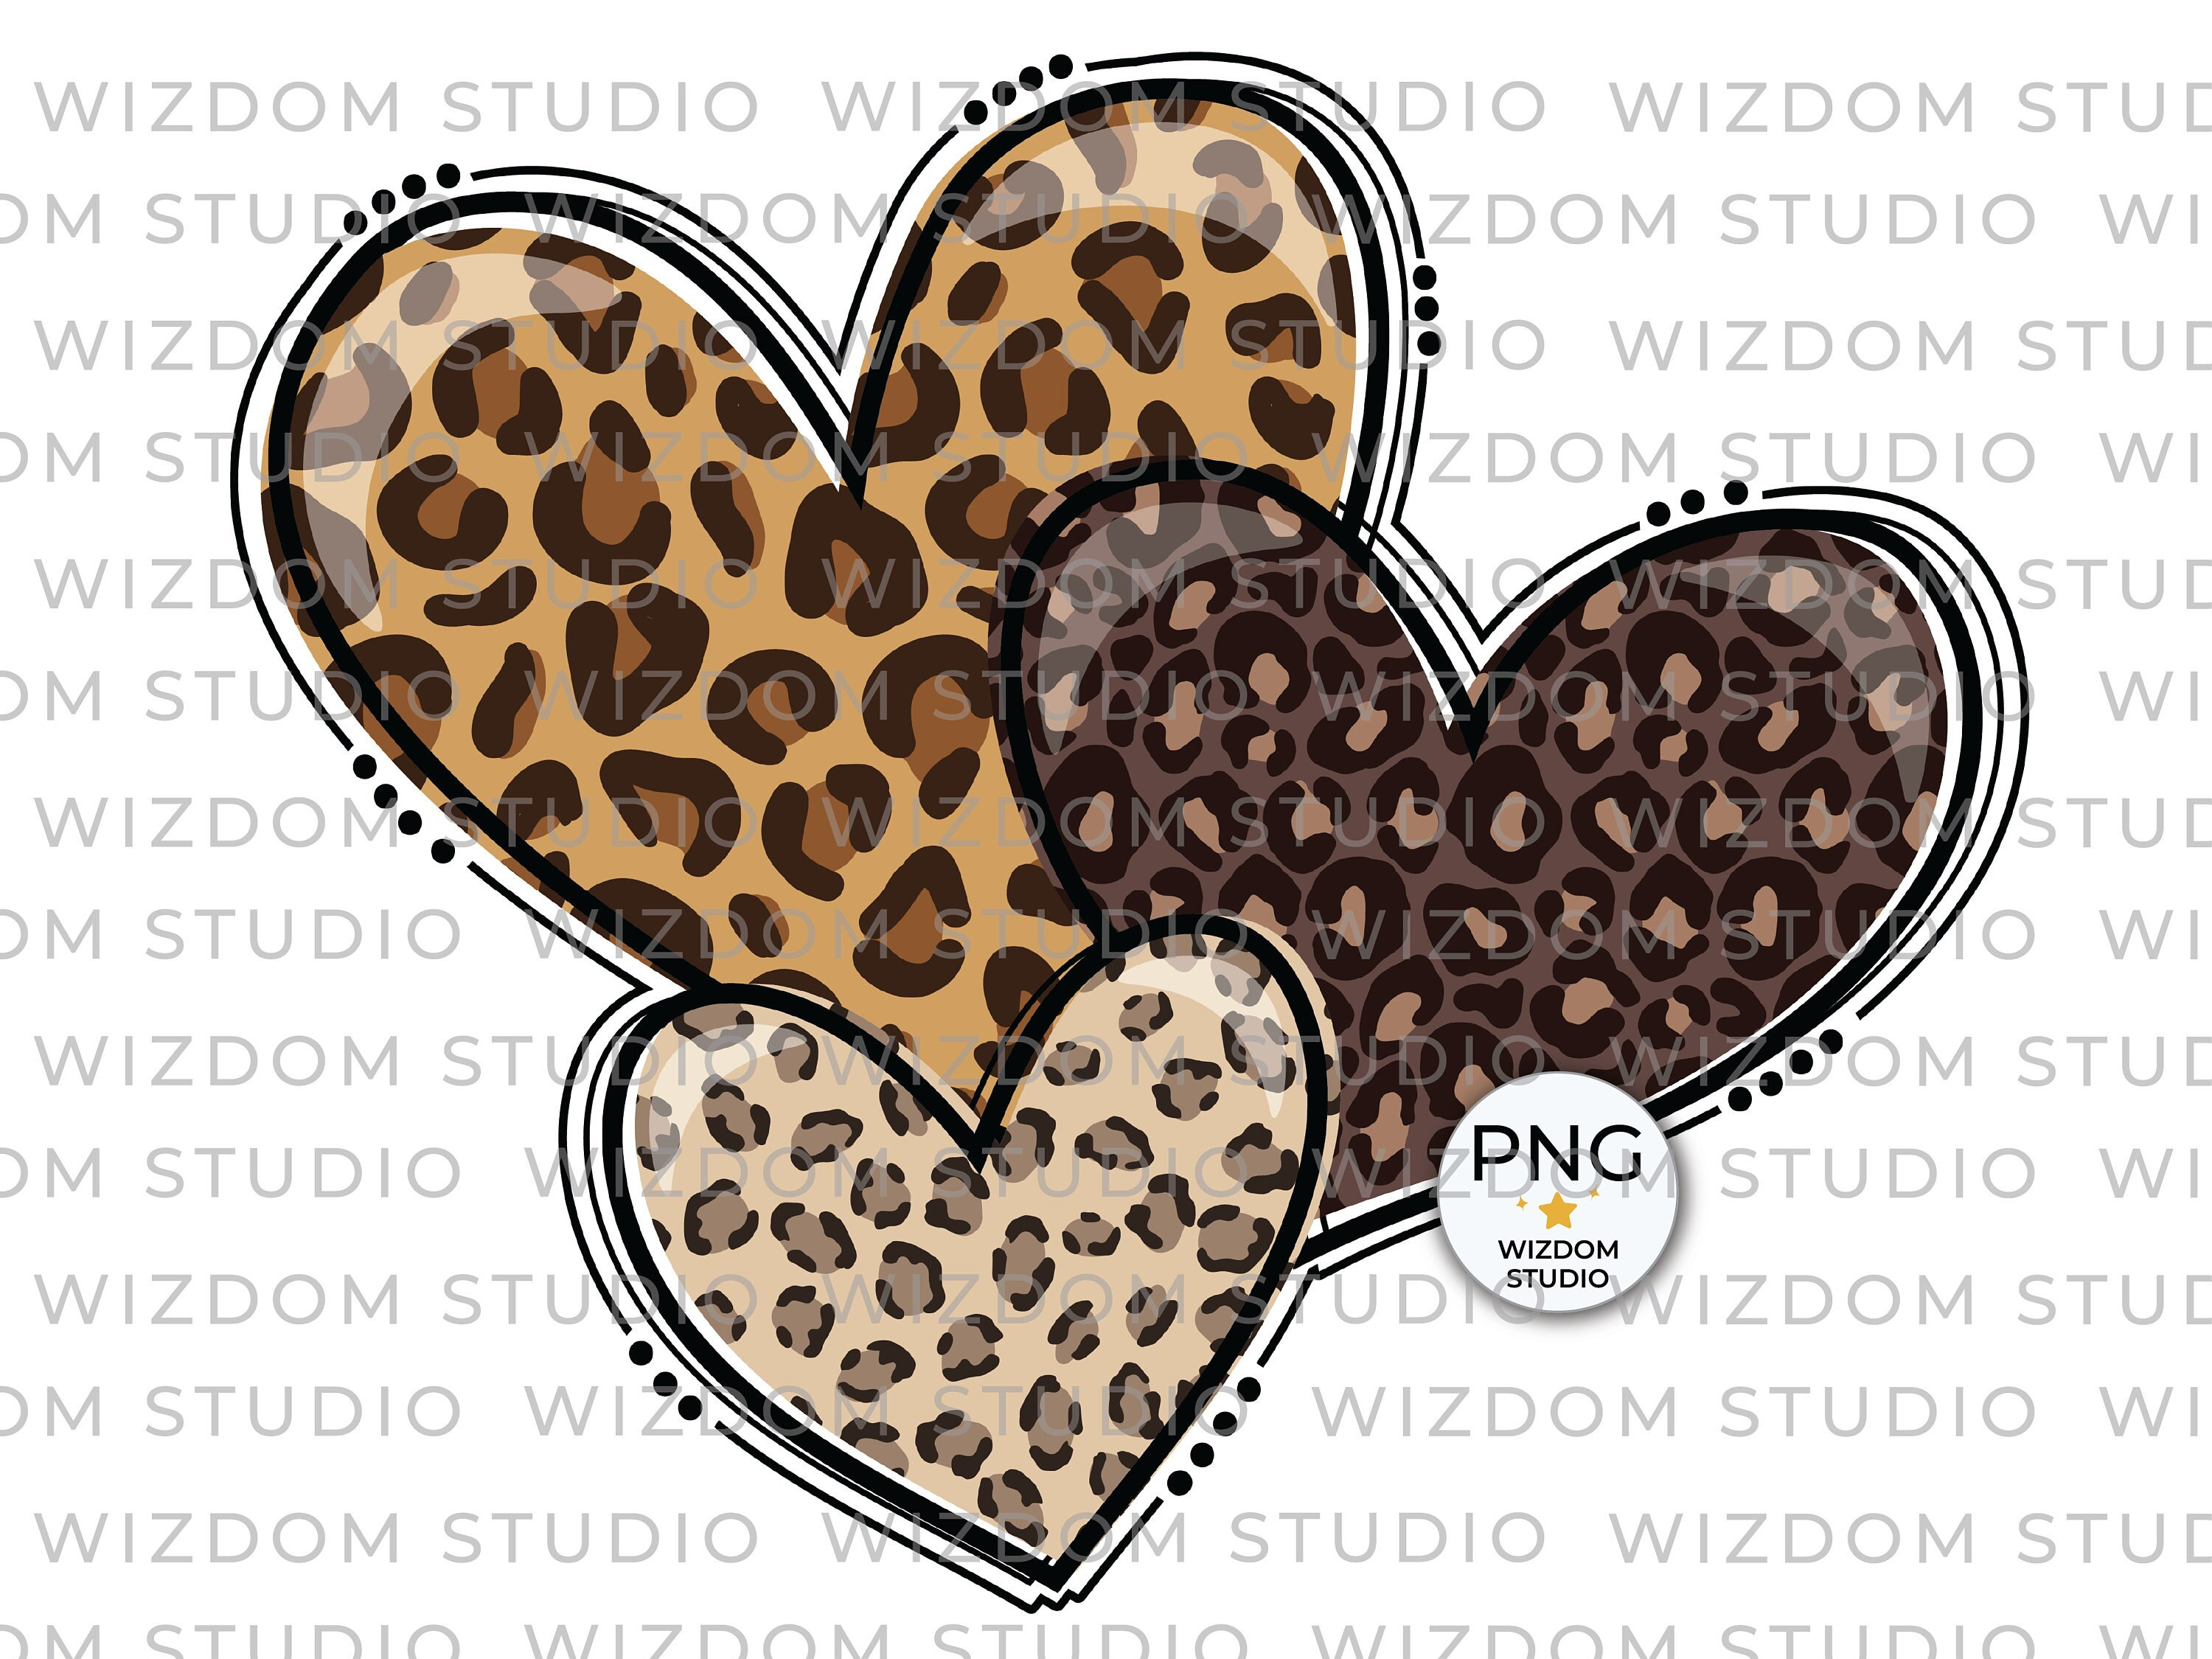 Leopard PnG Heart PnG Instant Download PNG Love PnG |Hearts PnG Heart Trio Leopard Print PnG for Sublimation Valentine's Day PnG